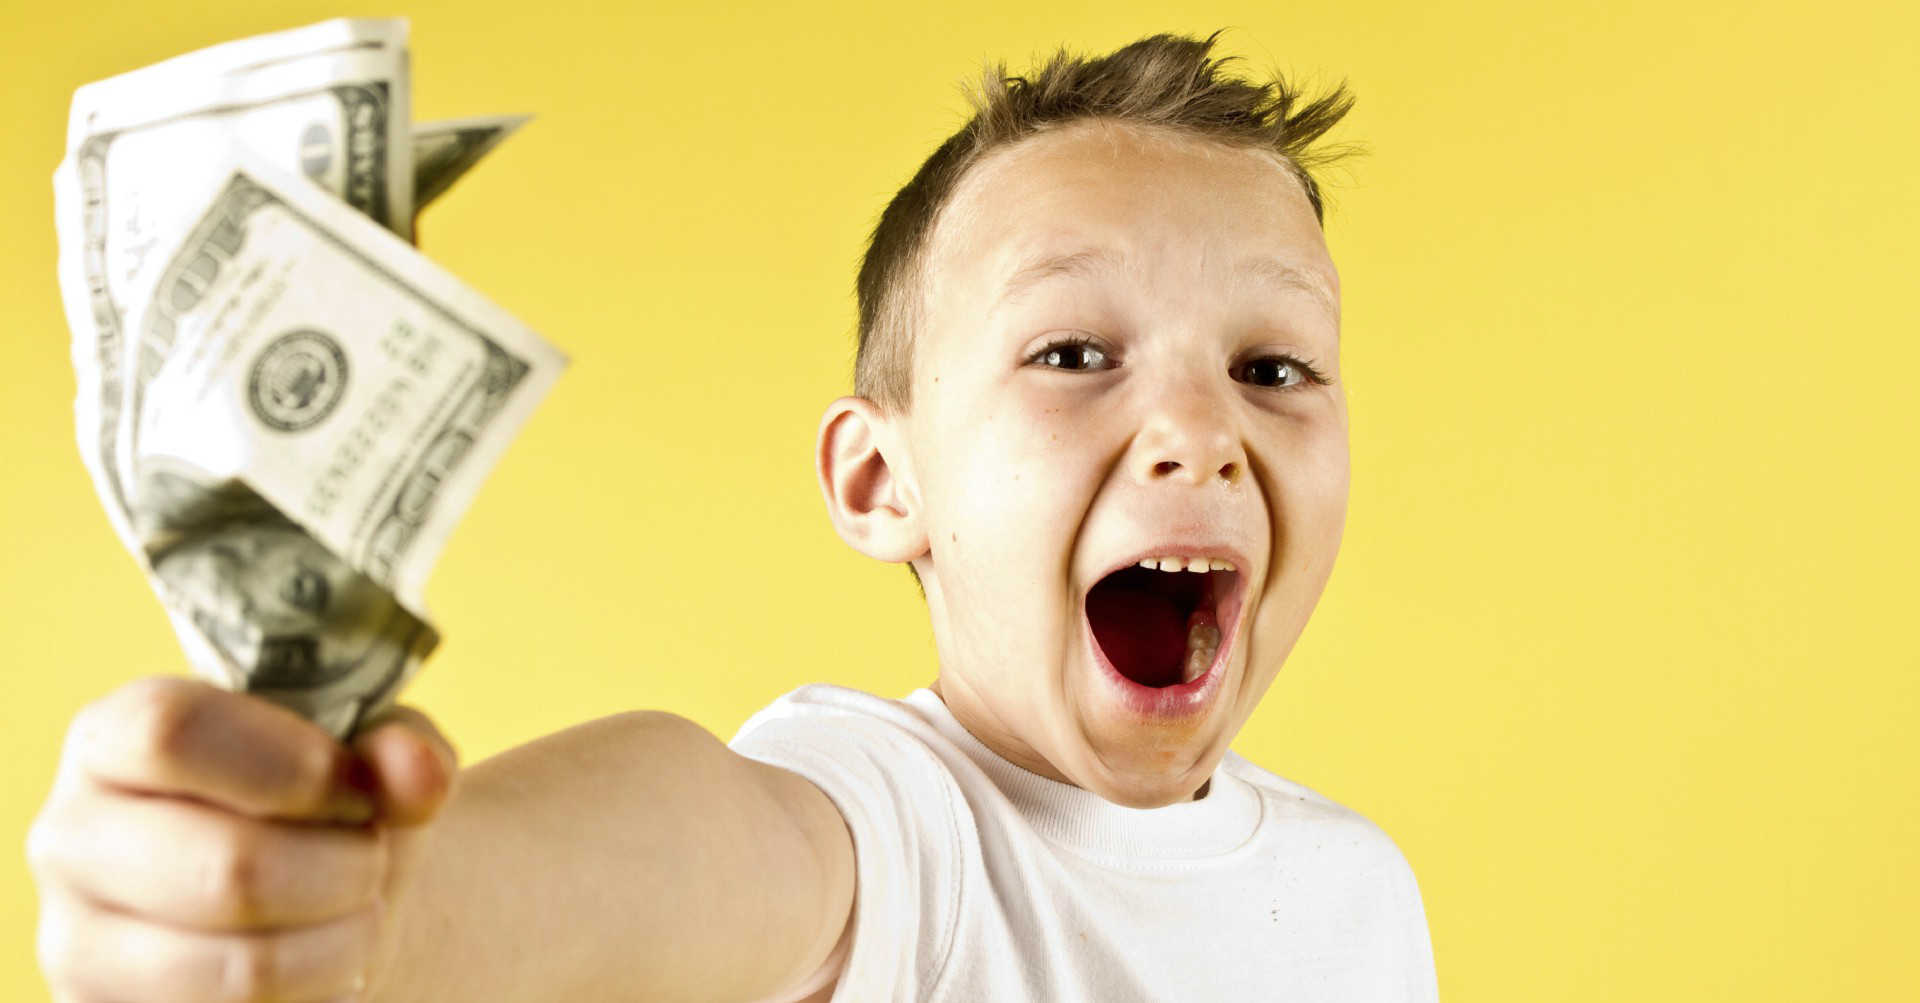 kid holding money with excitement on face